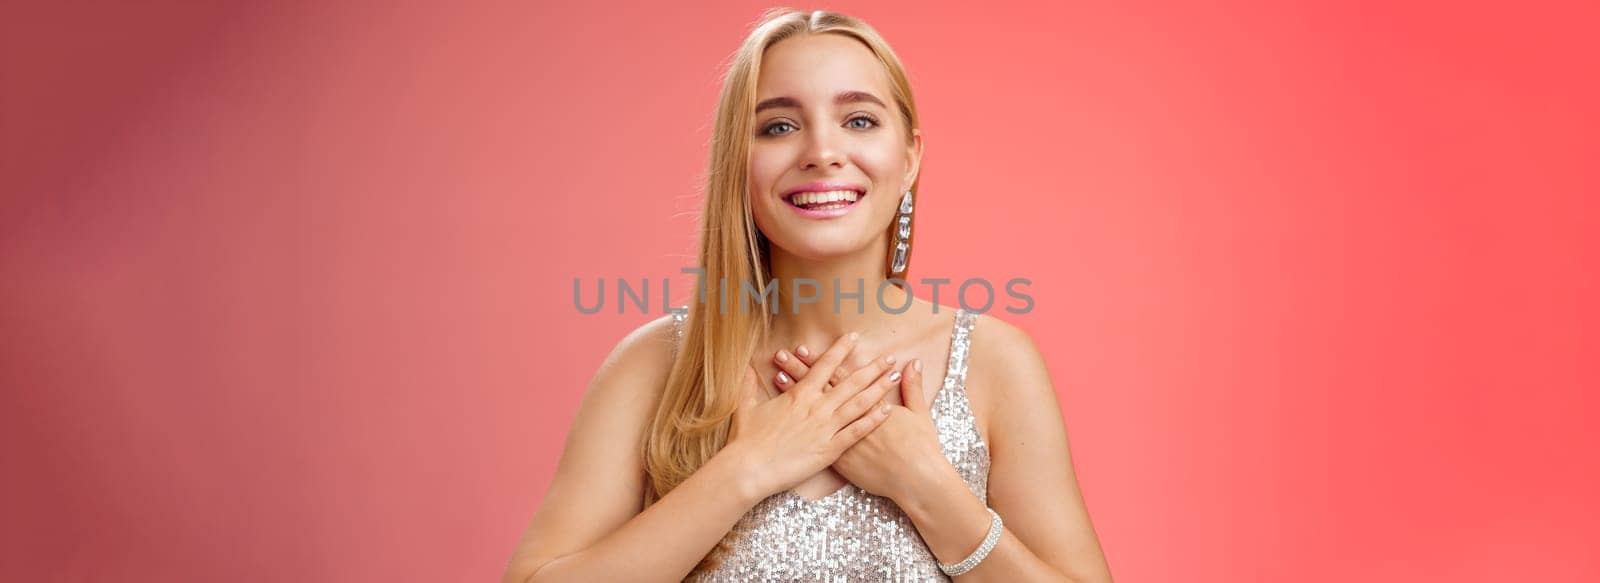 Grateful charming blond european 25s woman in silver party dress press palms heart feel thankful appreciate effort cherish romantic gesture receive flattering compliments gifts, smiling happily.